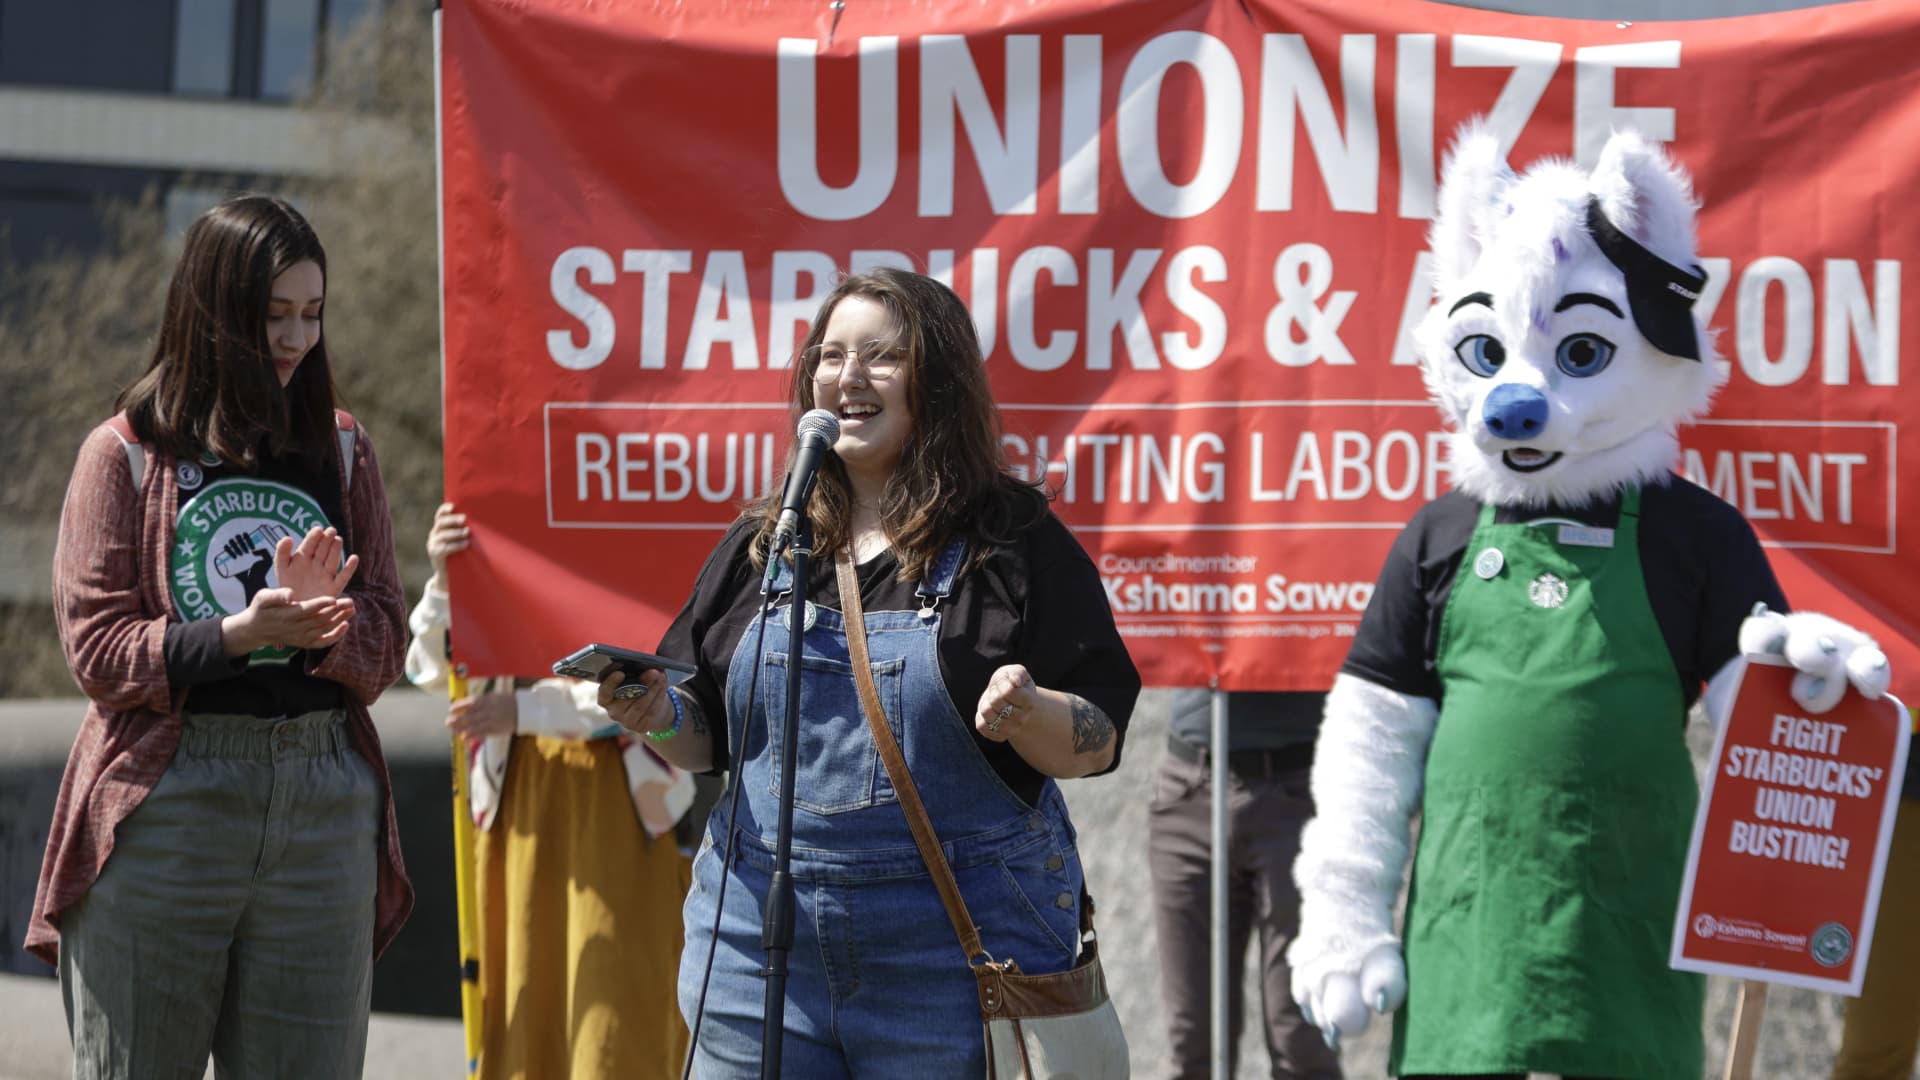 Unions could face a big obstacle in 2023 if the economy falls into a recession